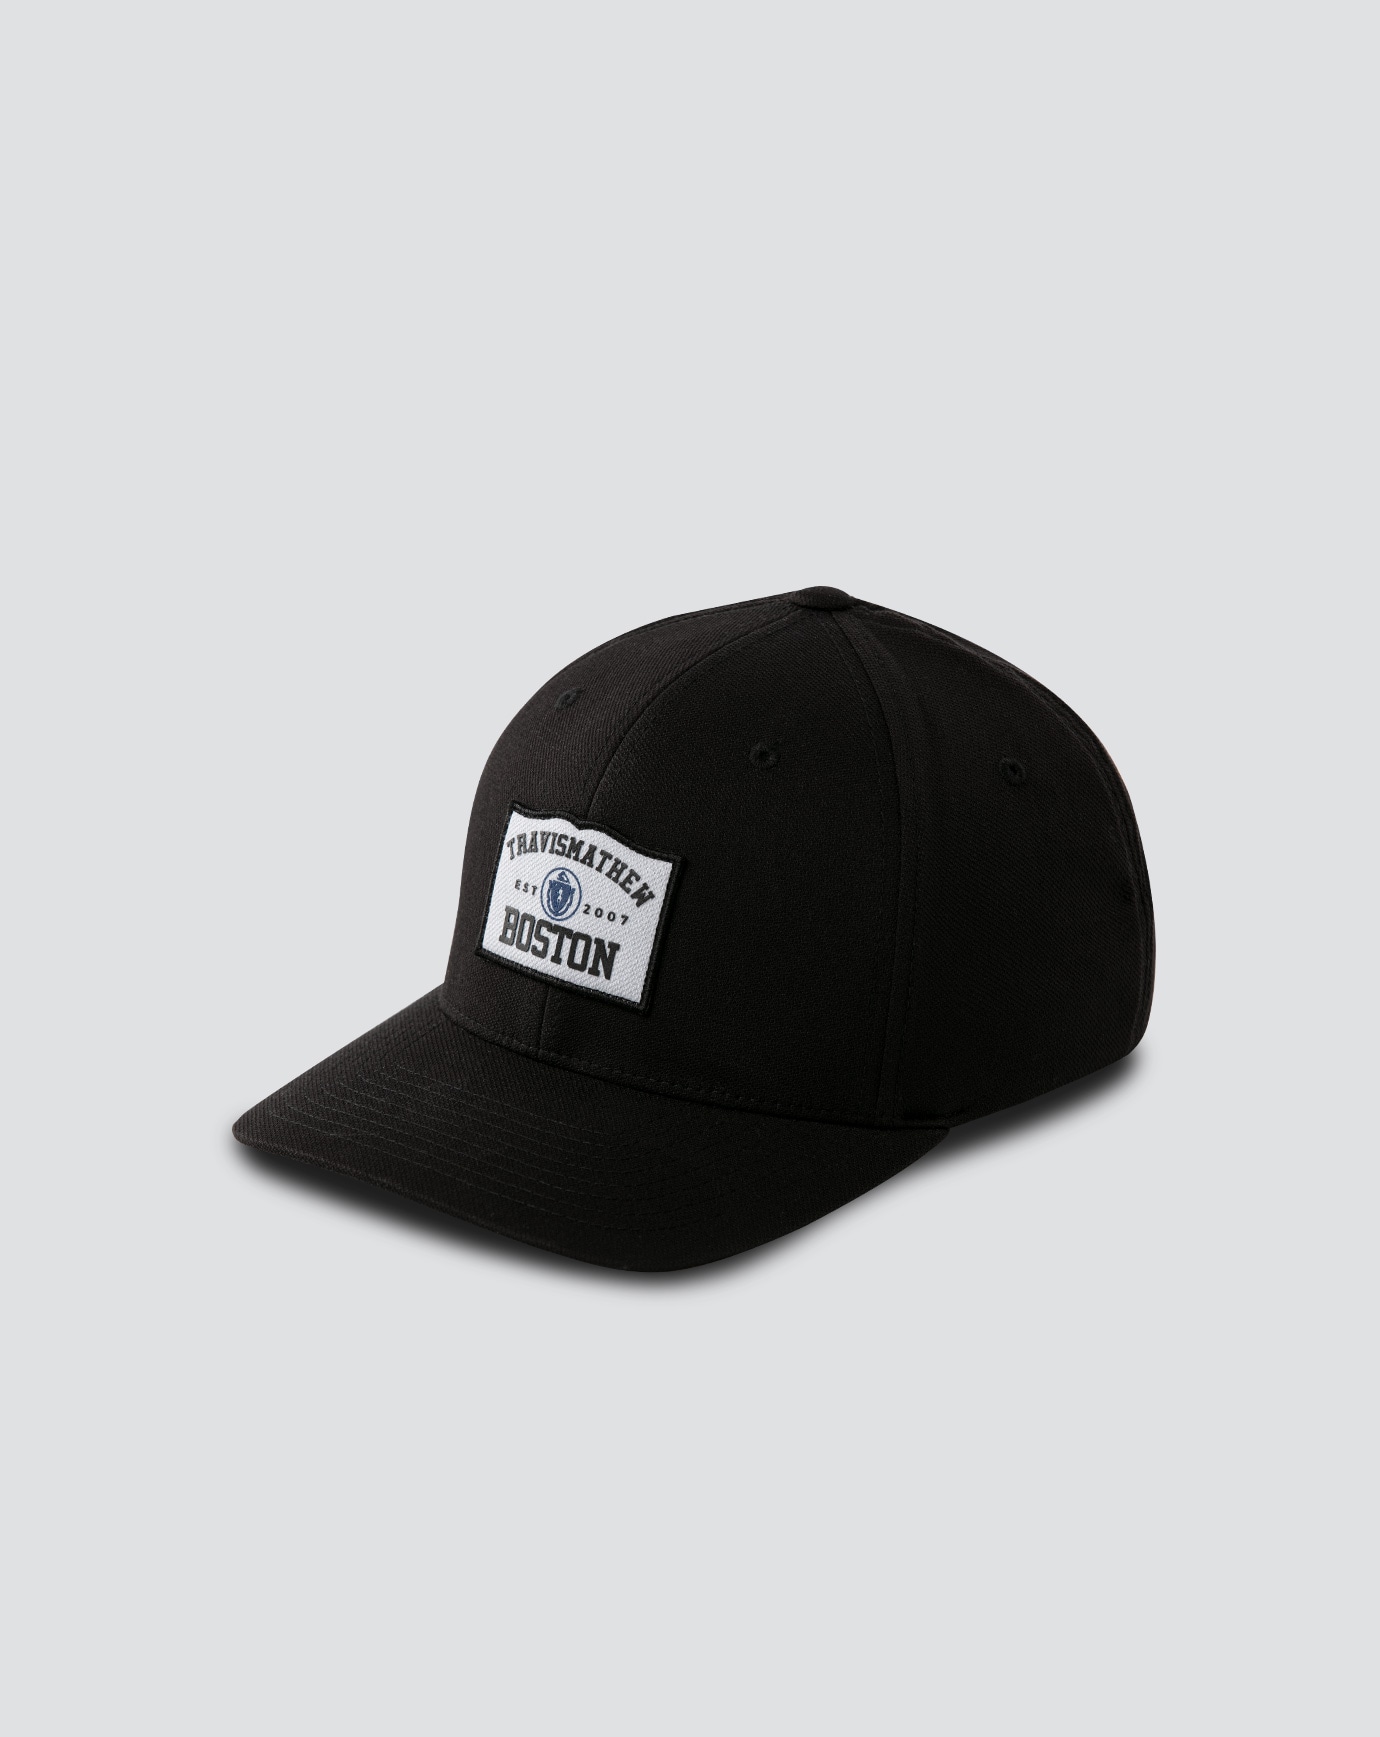 BOYLSTON FITTED HAT Image Thumbnail 1